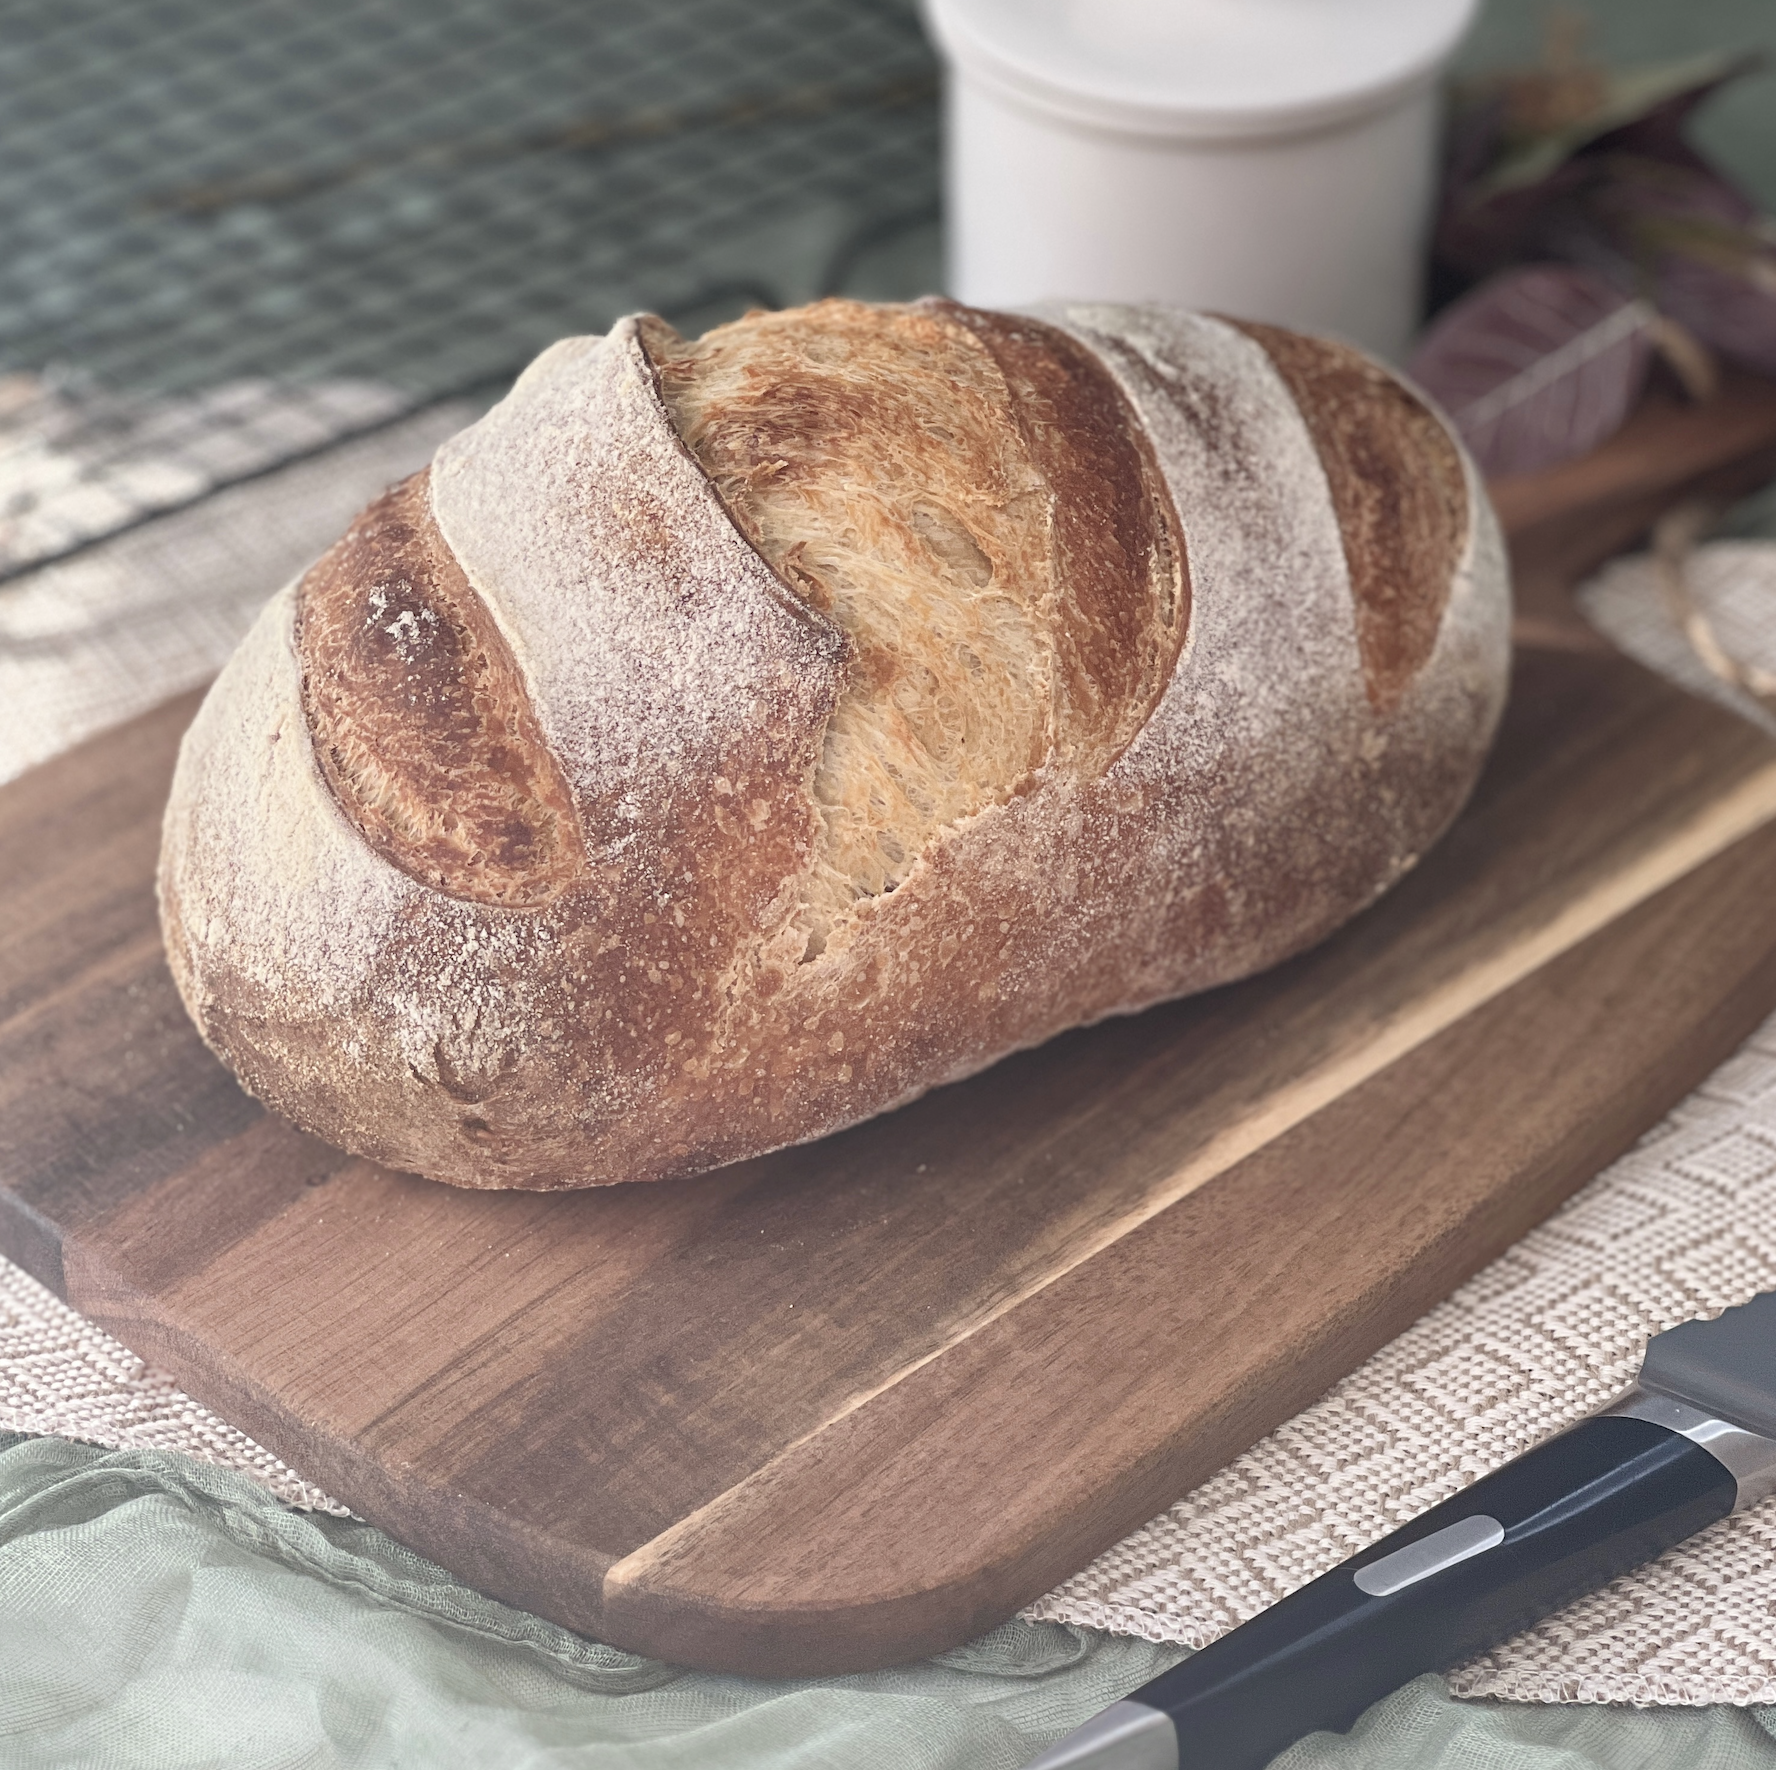 sourdough bread social media influencer home baker Samantha interview with The Sourdough People website in Canada 5